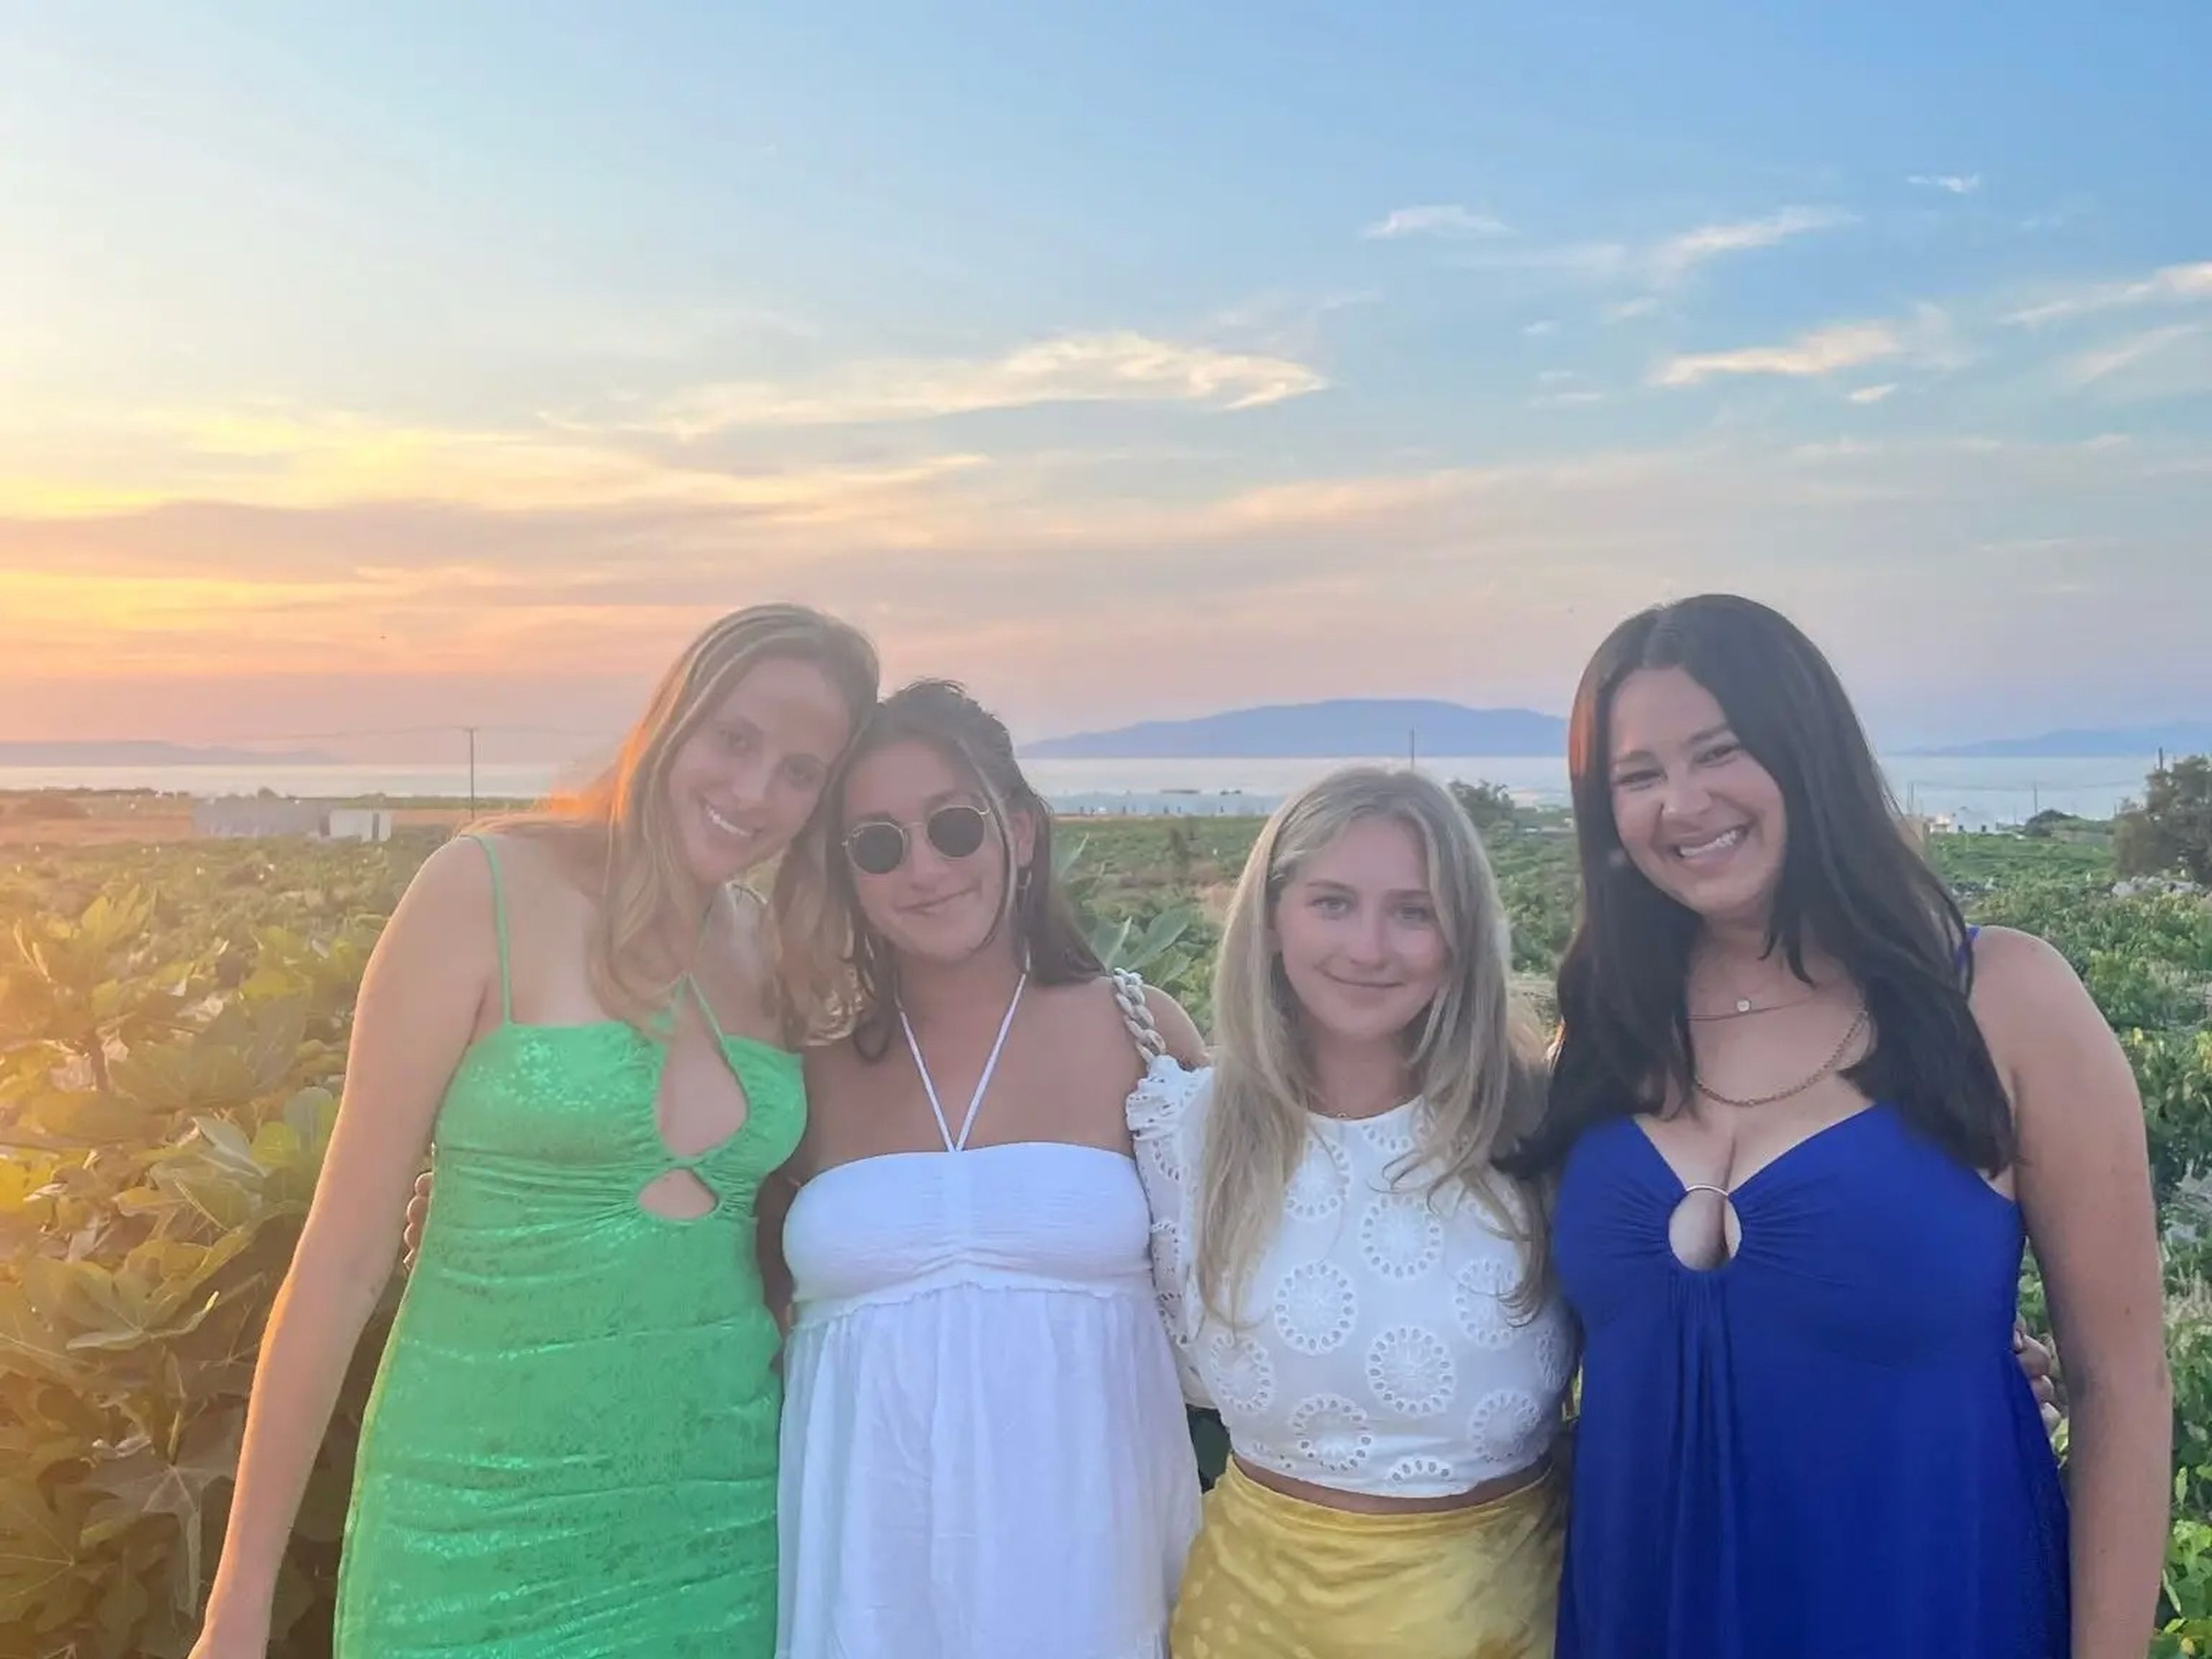 jordana and her friends posing in a vineyard in greece at sunset